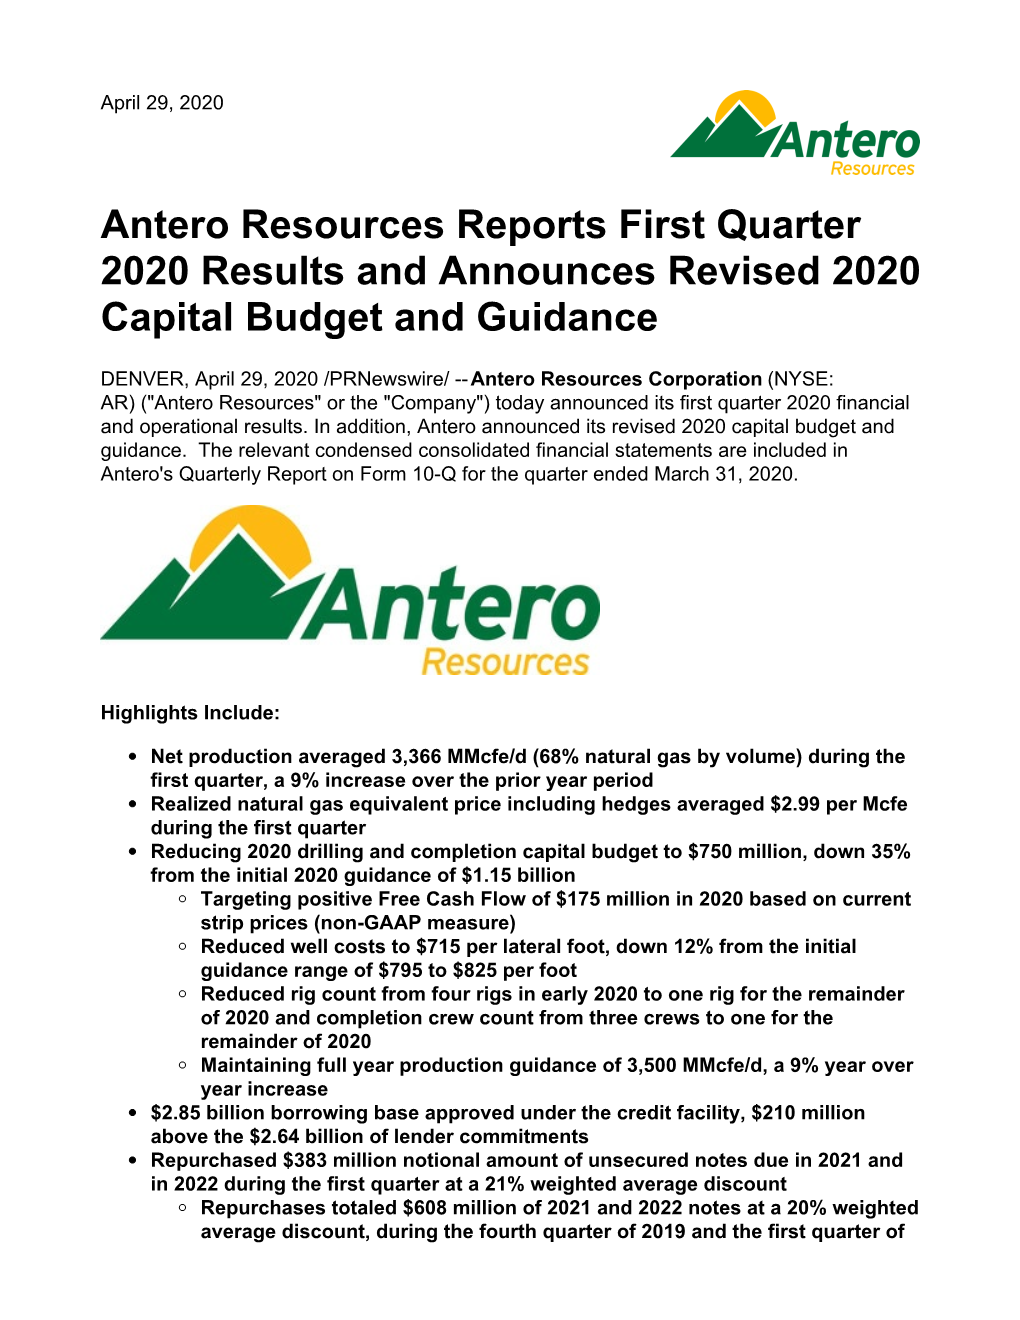 Antero Resources Reports First Quarter 2020 Results and Announces Revised 2020 Capital Budget and Guidance